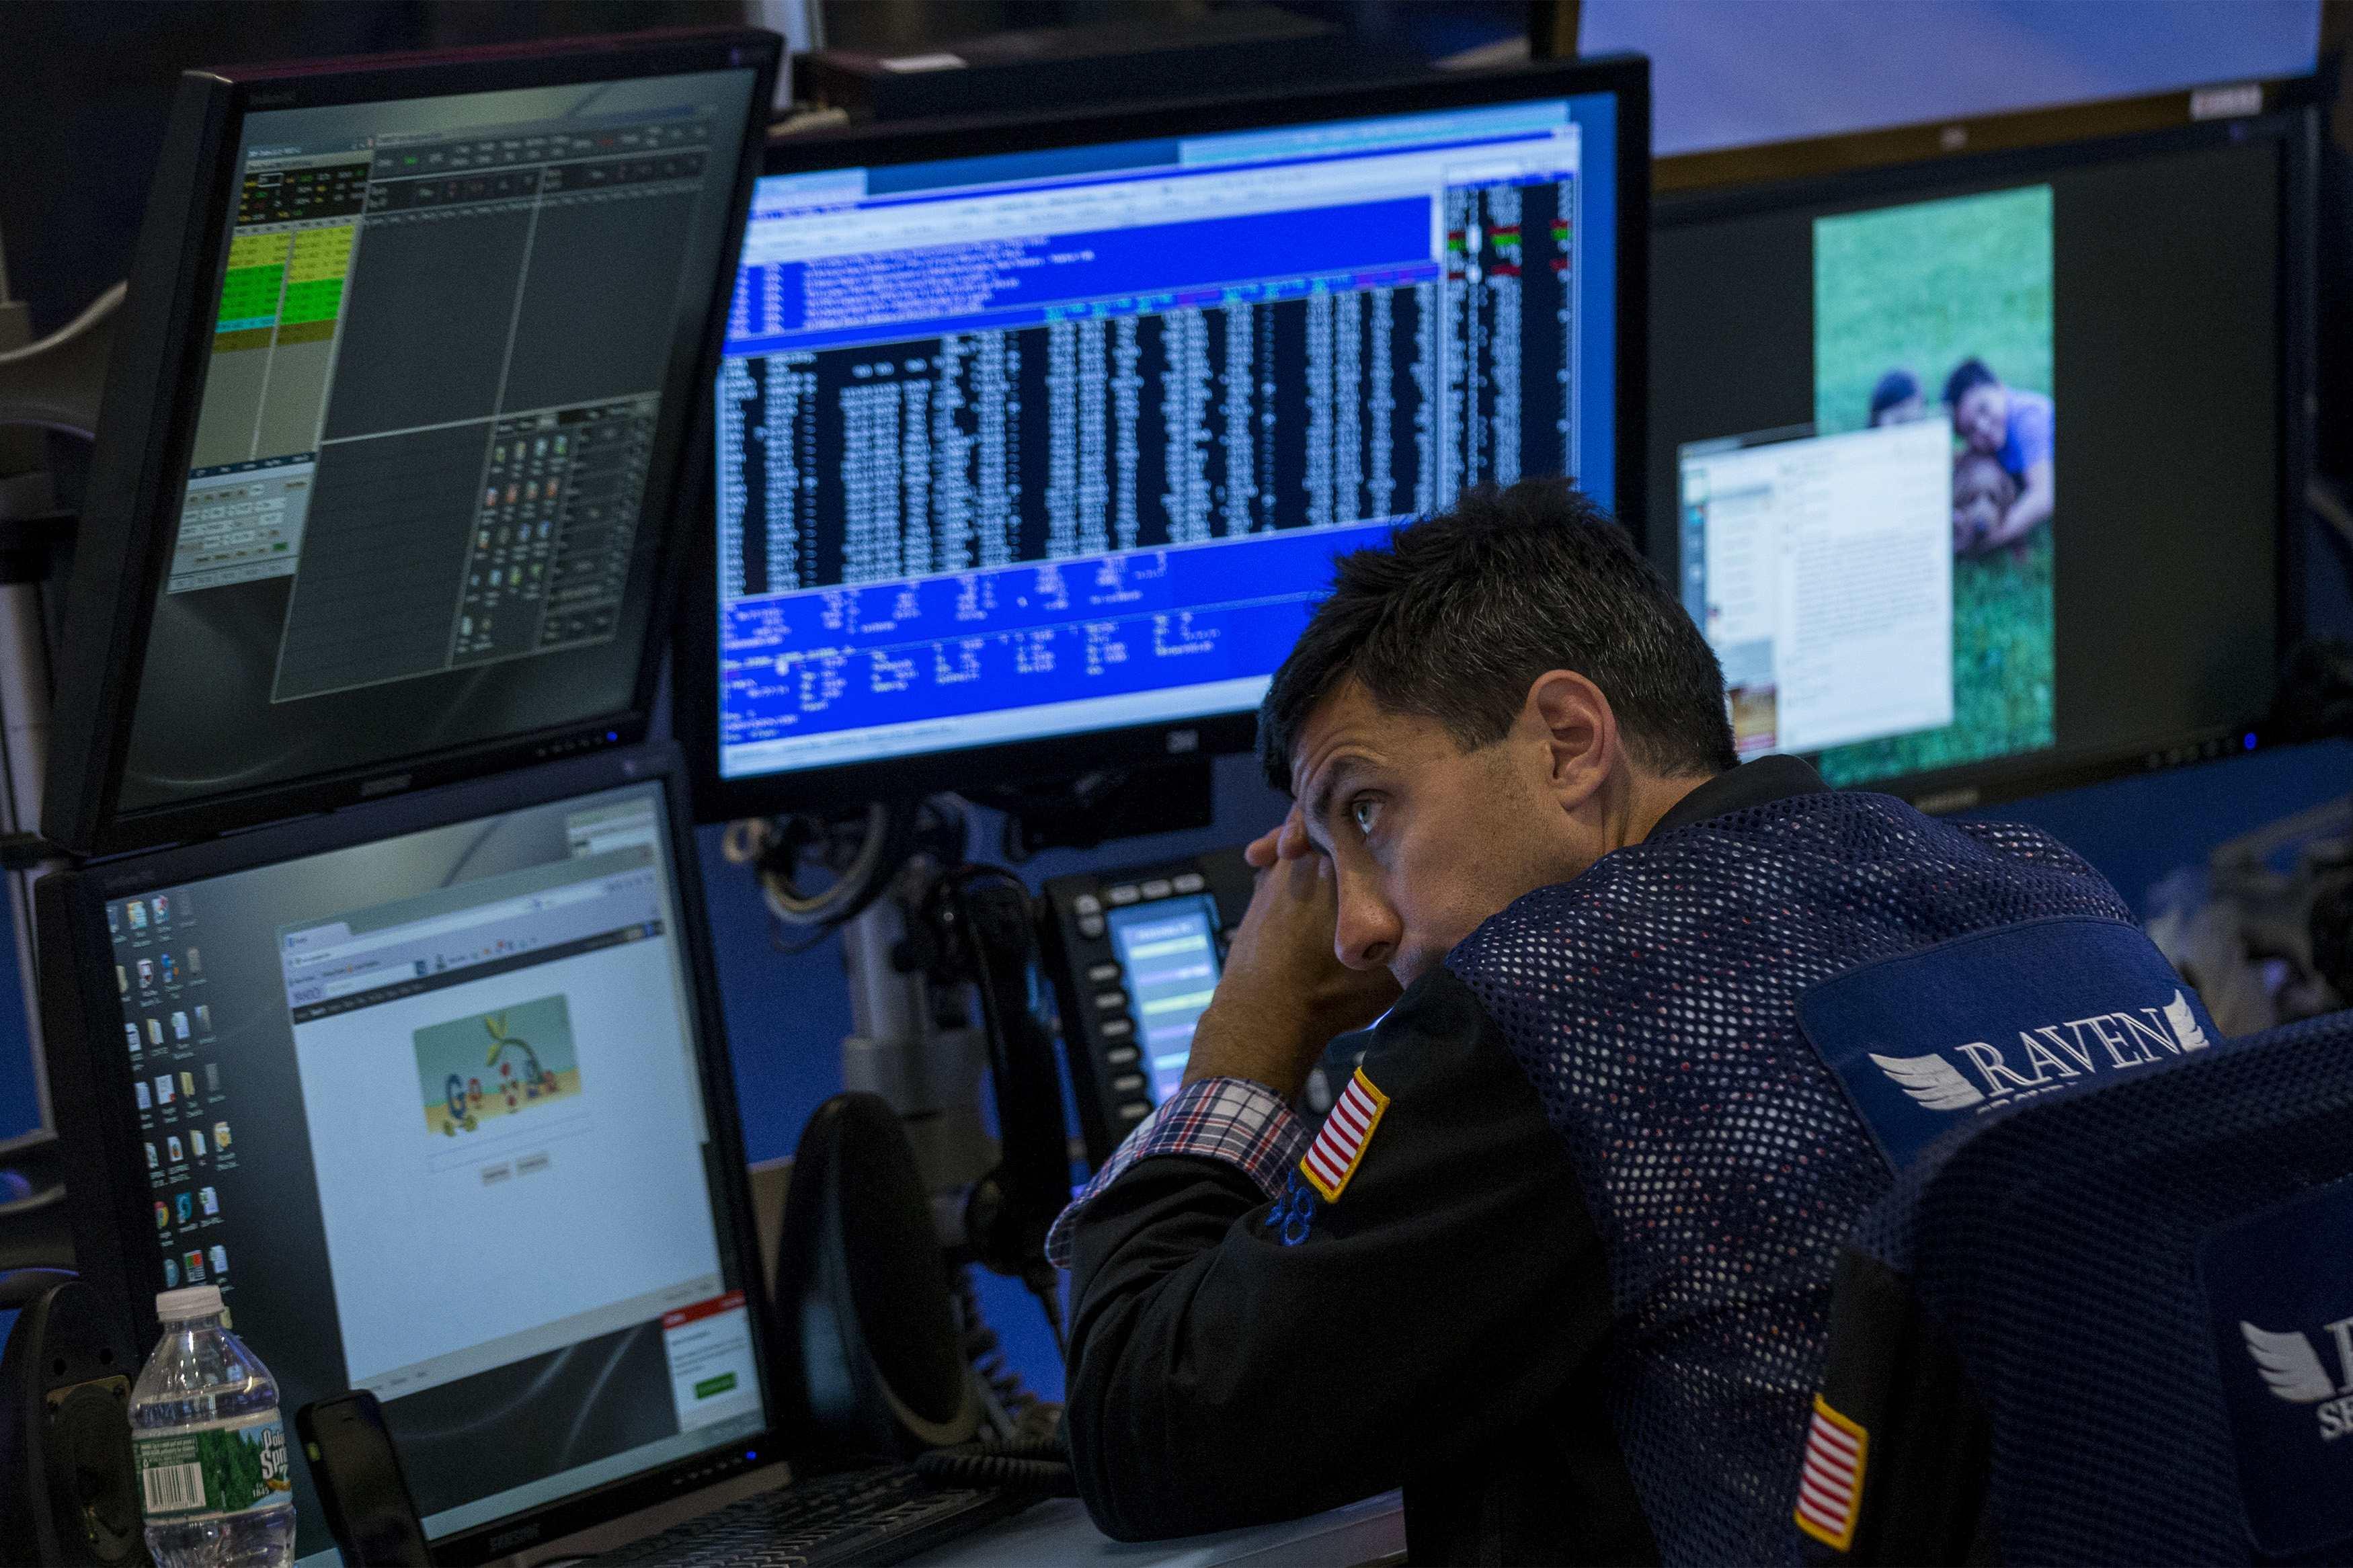 Wall St Ends Lower, S&P 500 Falls for Third Straight Day